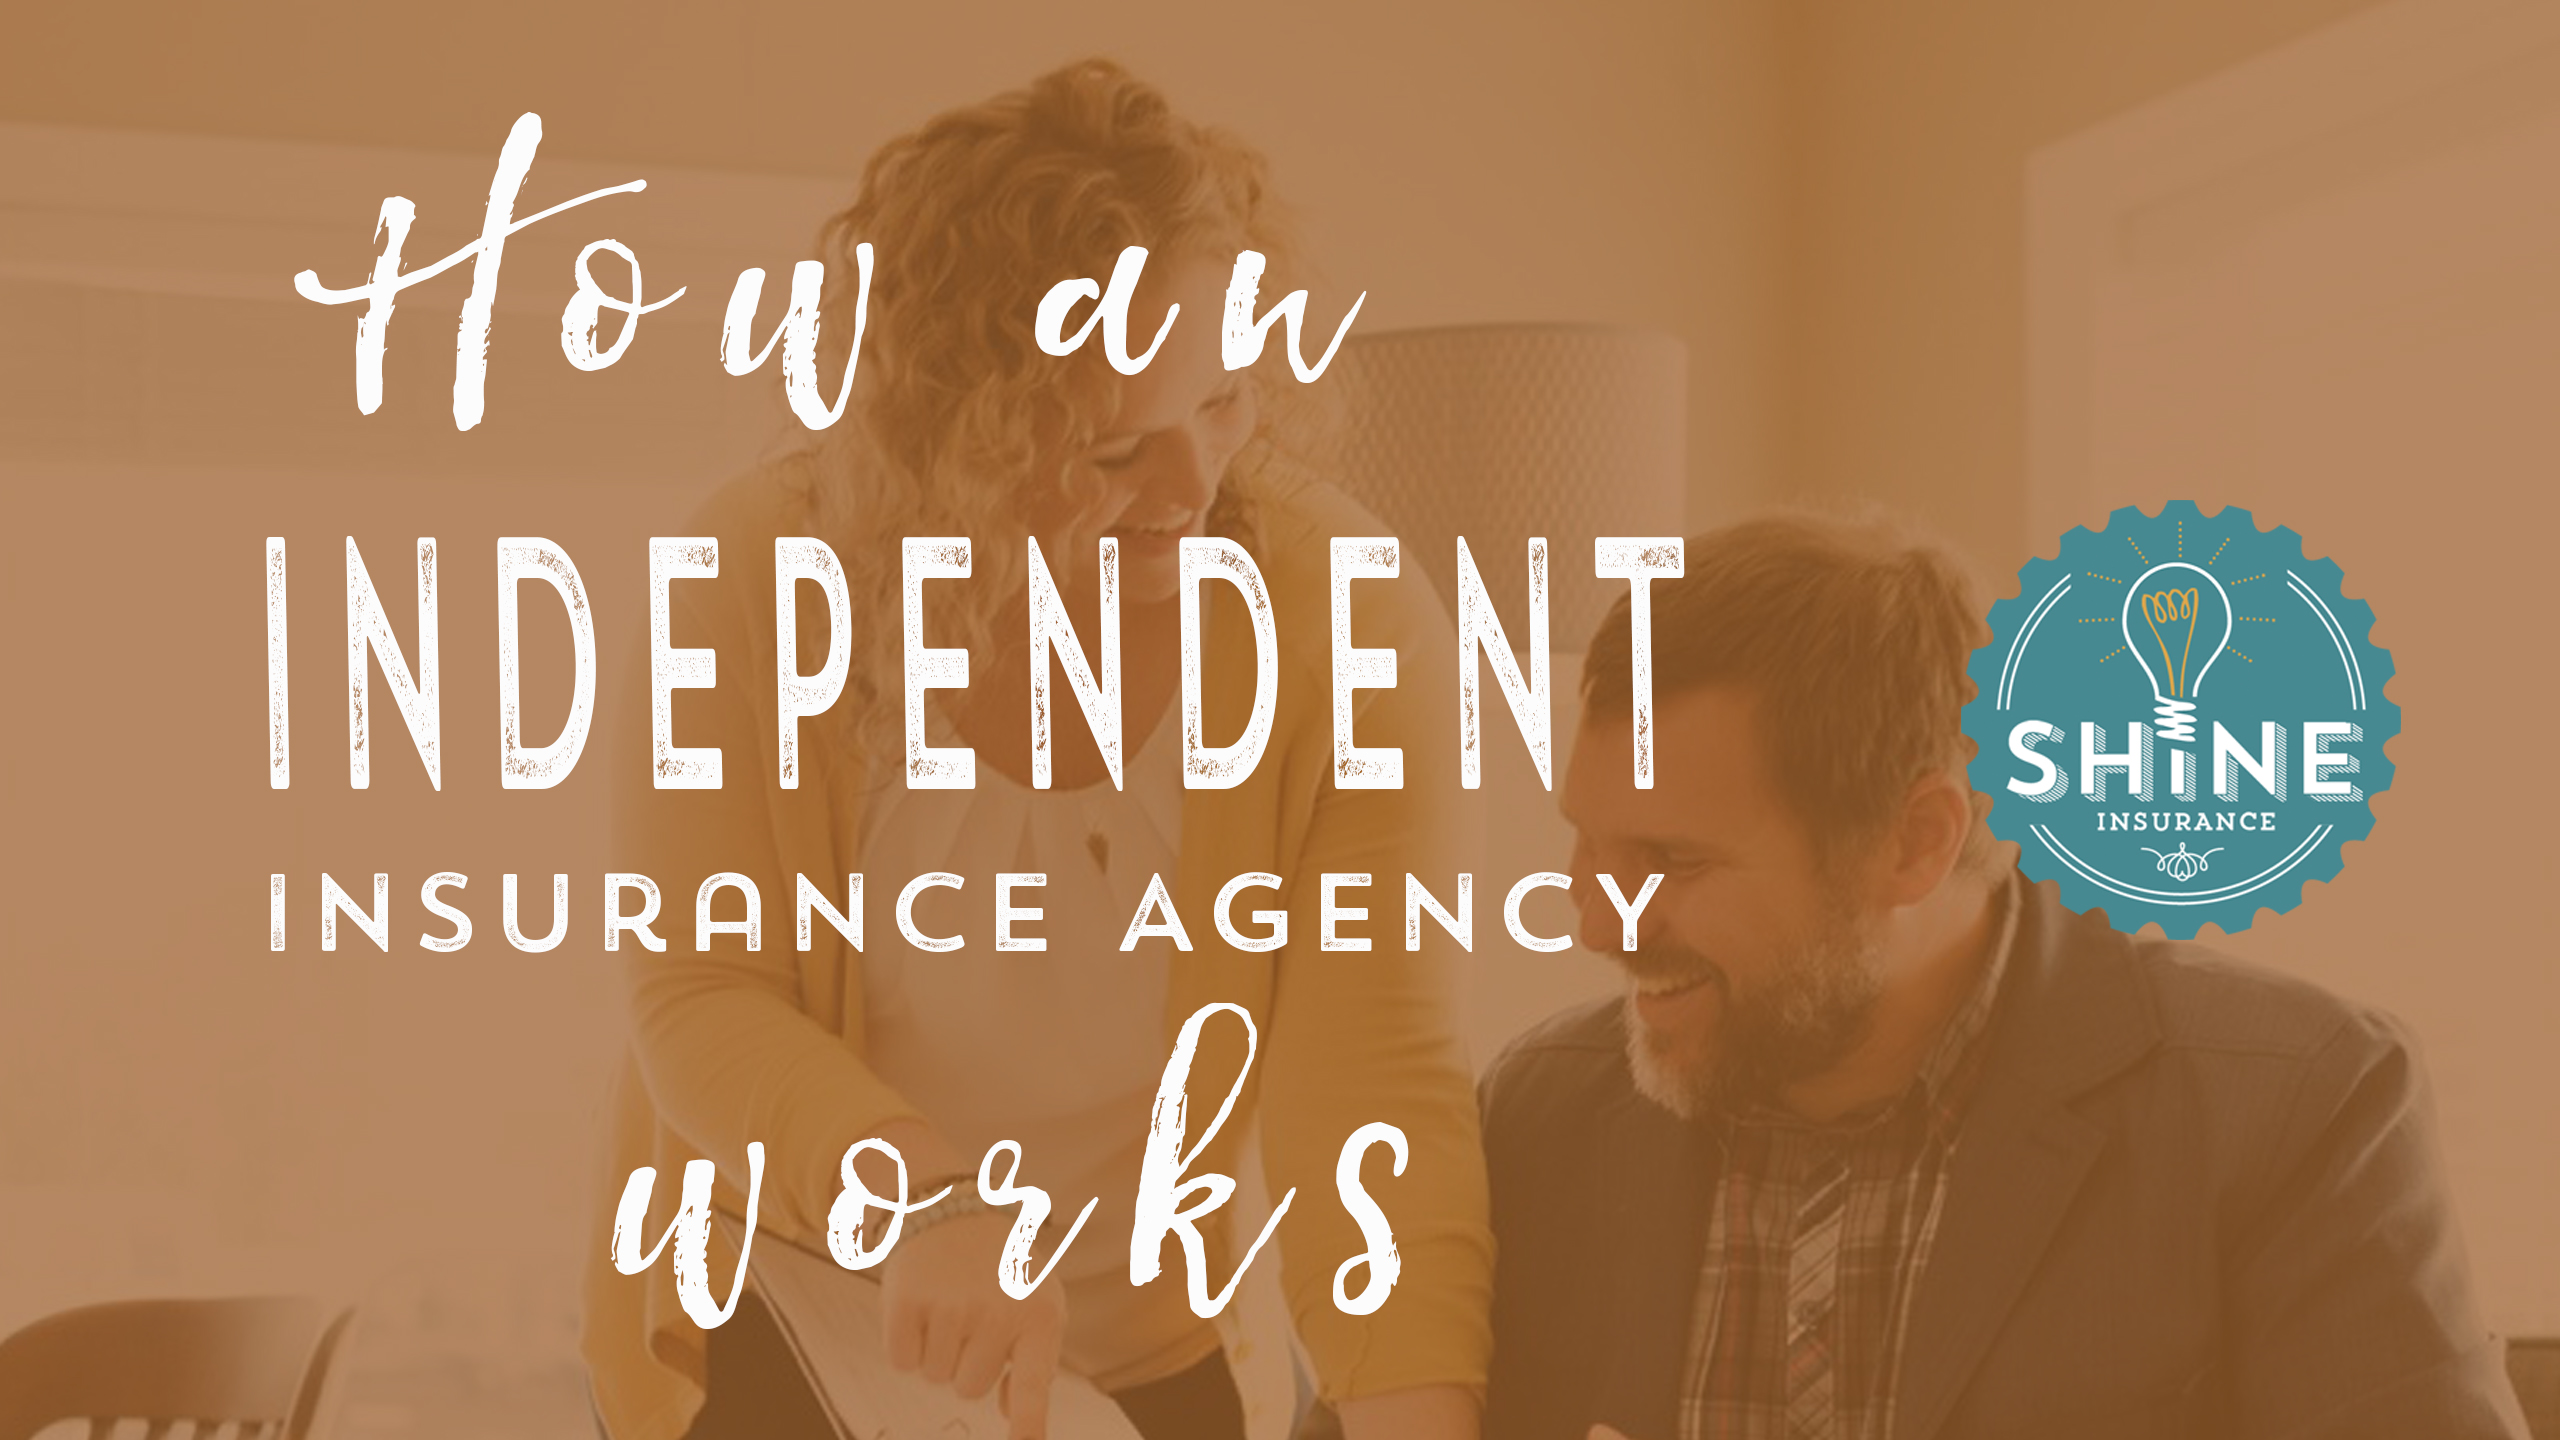 Independent Insurance Agency - Shine Insurance Agency